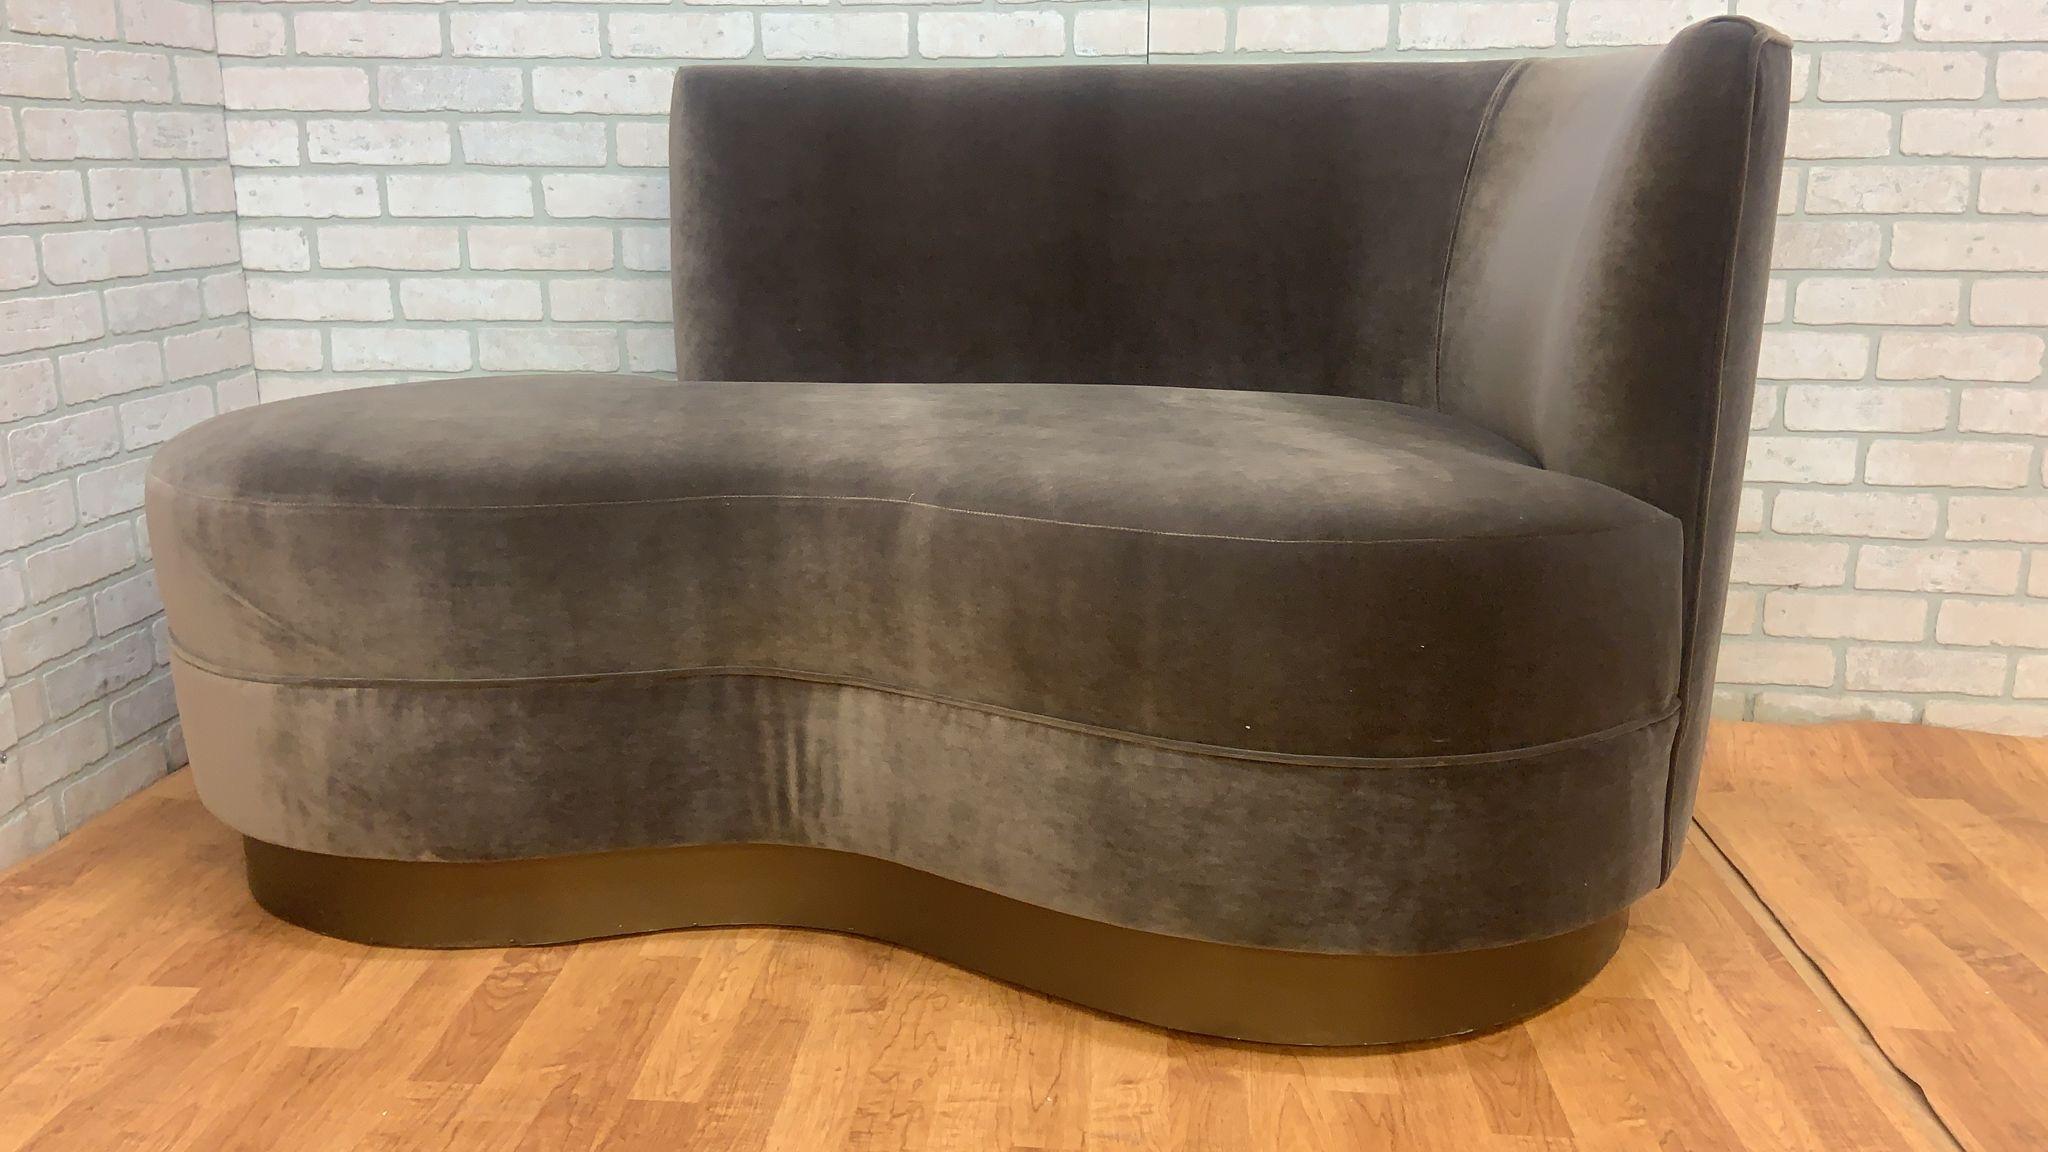 Hand-Crafted Mid Century Modern Chaise Newly Reupholstered in Grey Velvet on a Bronze Base